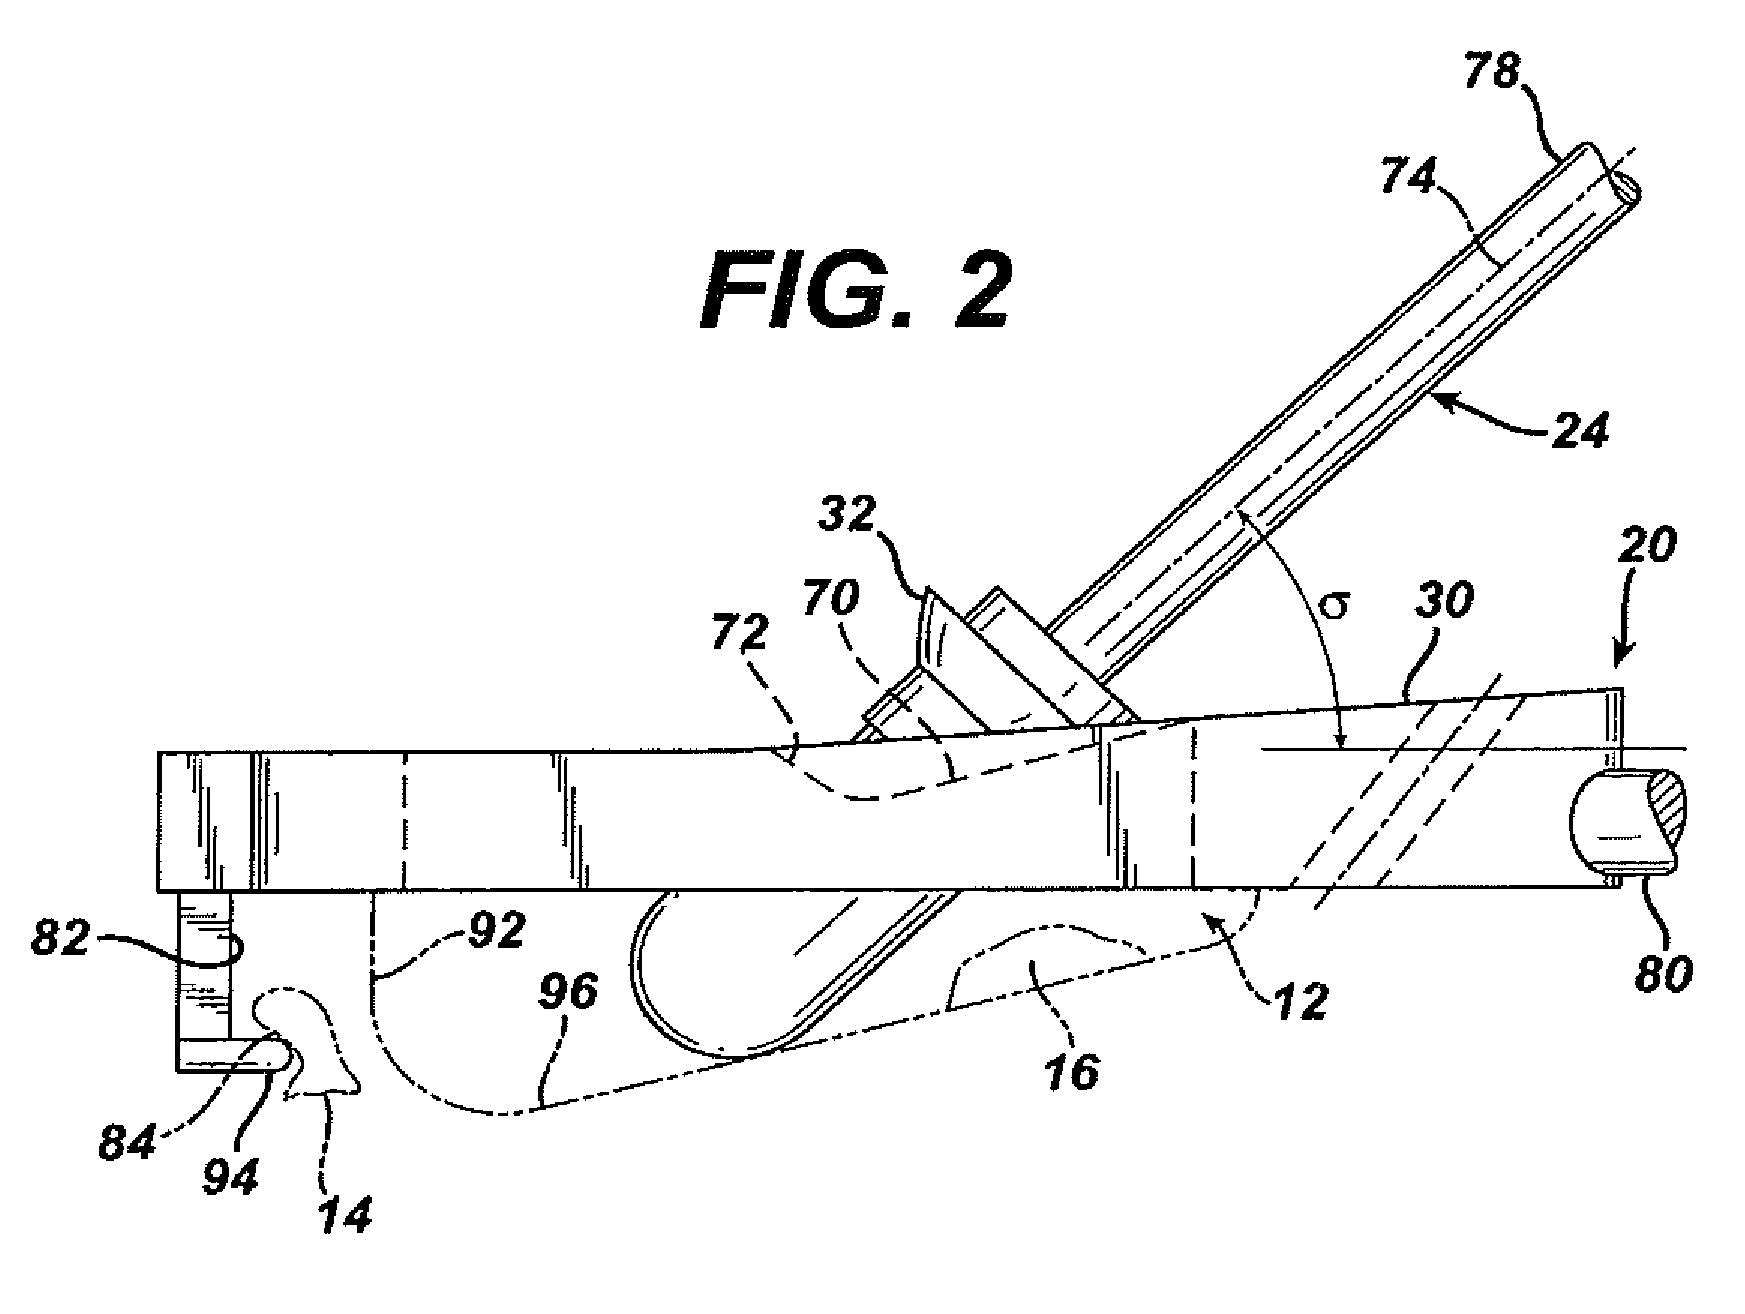 Method for Removal of Bone